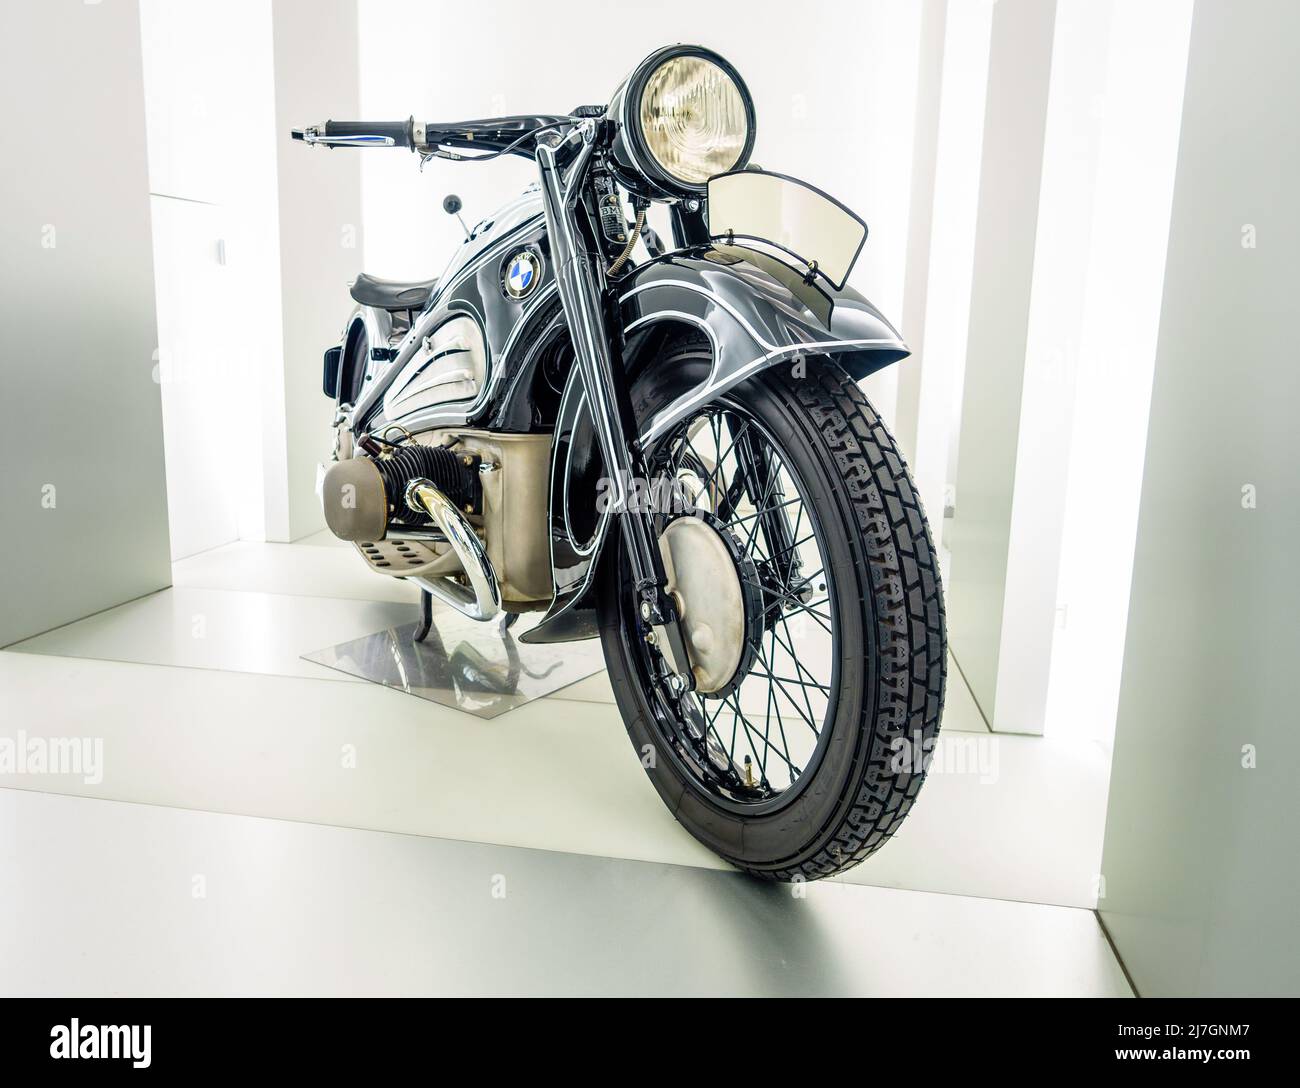 Munich, Germany, September 29, 2015: 1937 BMW R7 classic motorcycle at BMW Museum in Munich, Germany Stock Photo